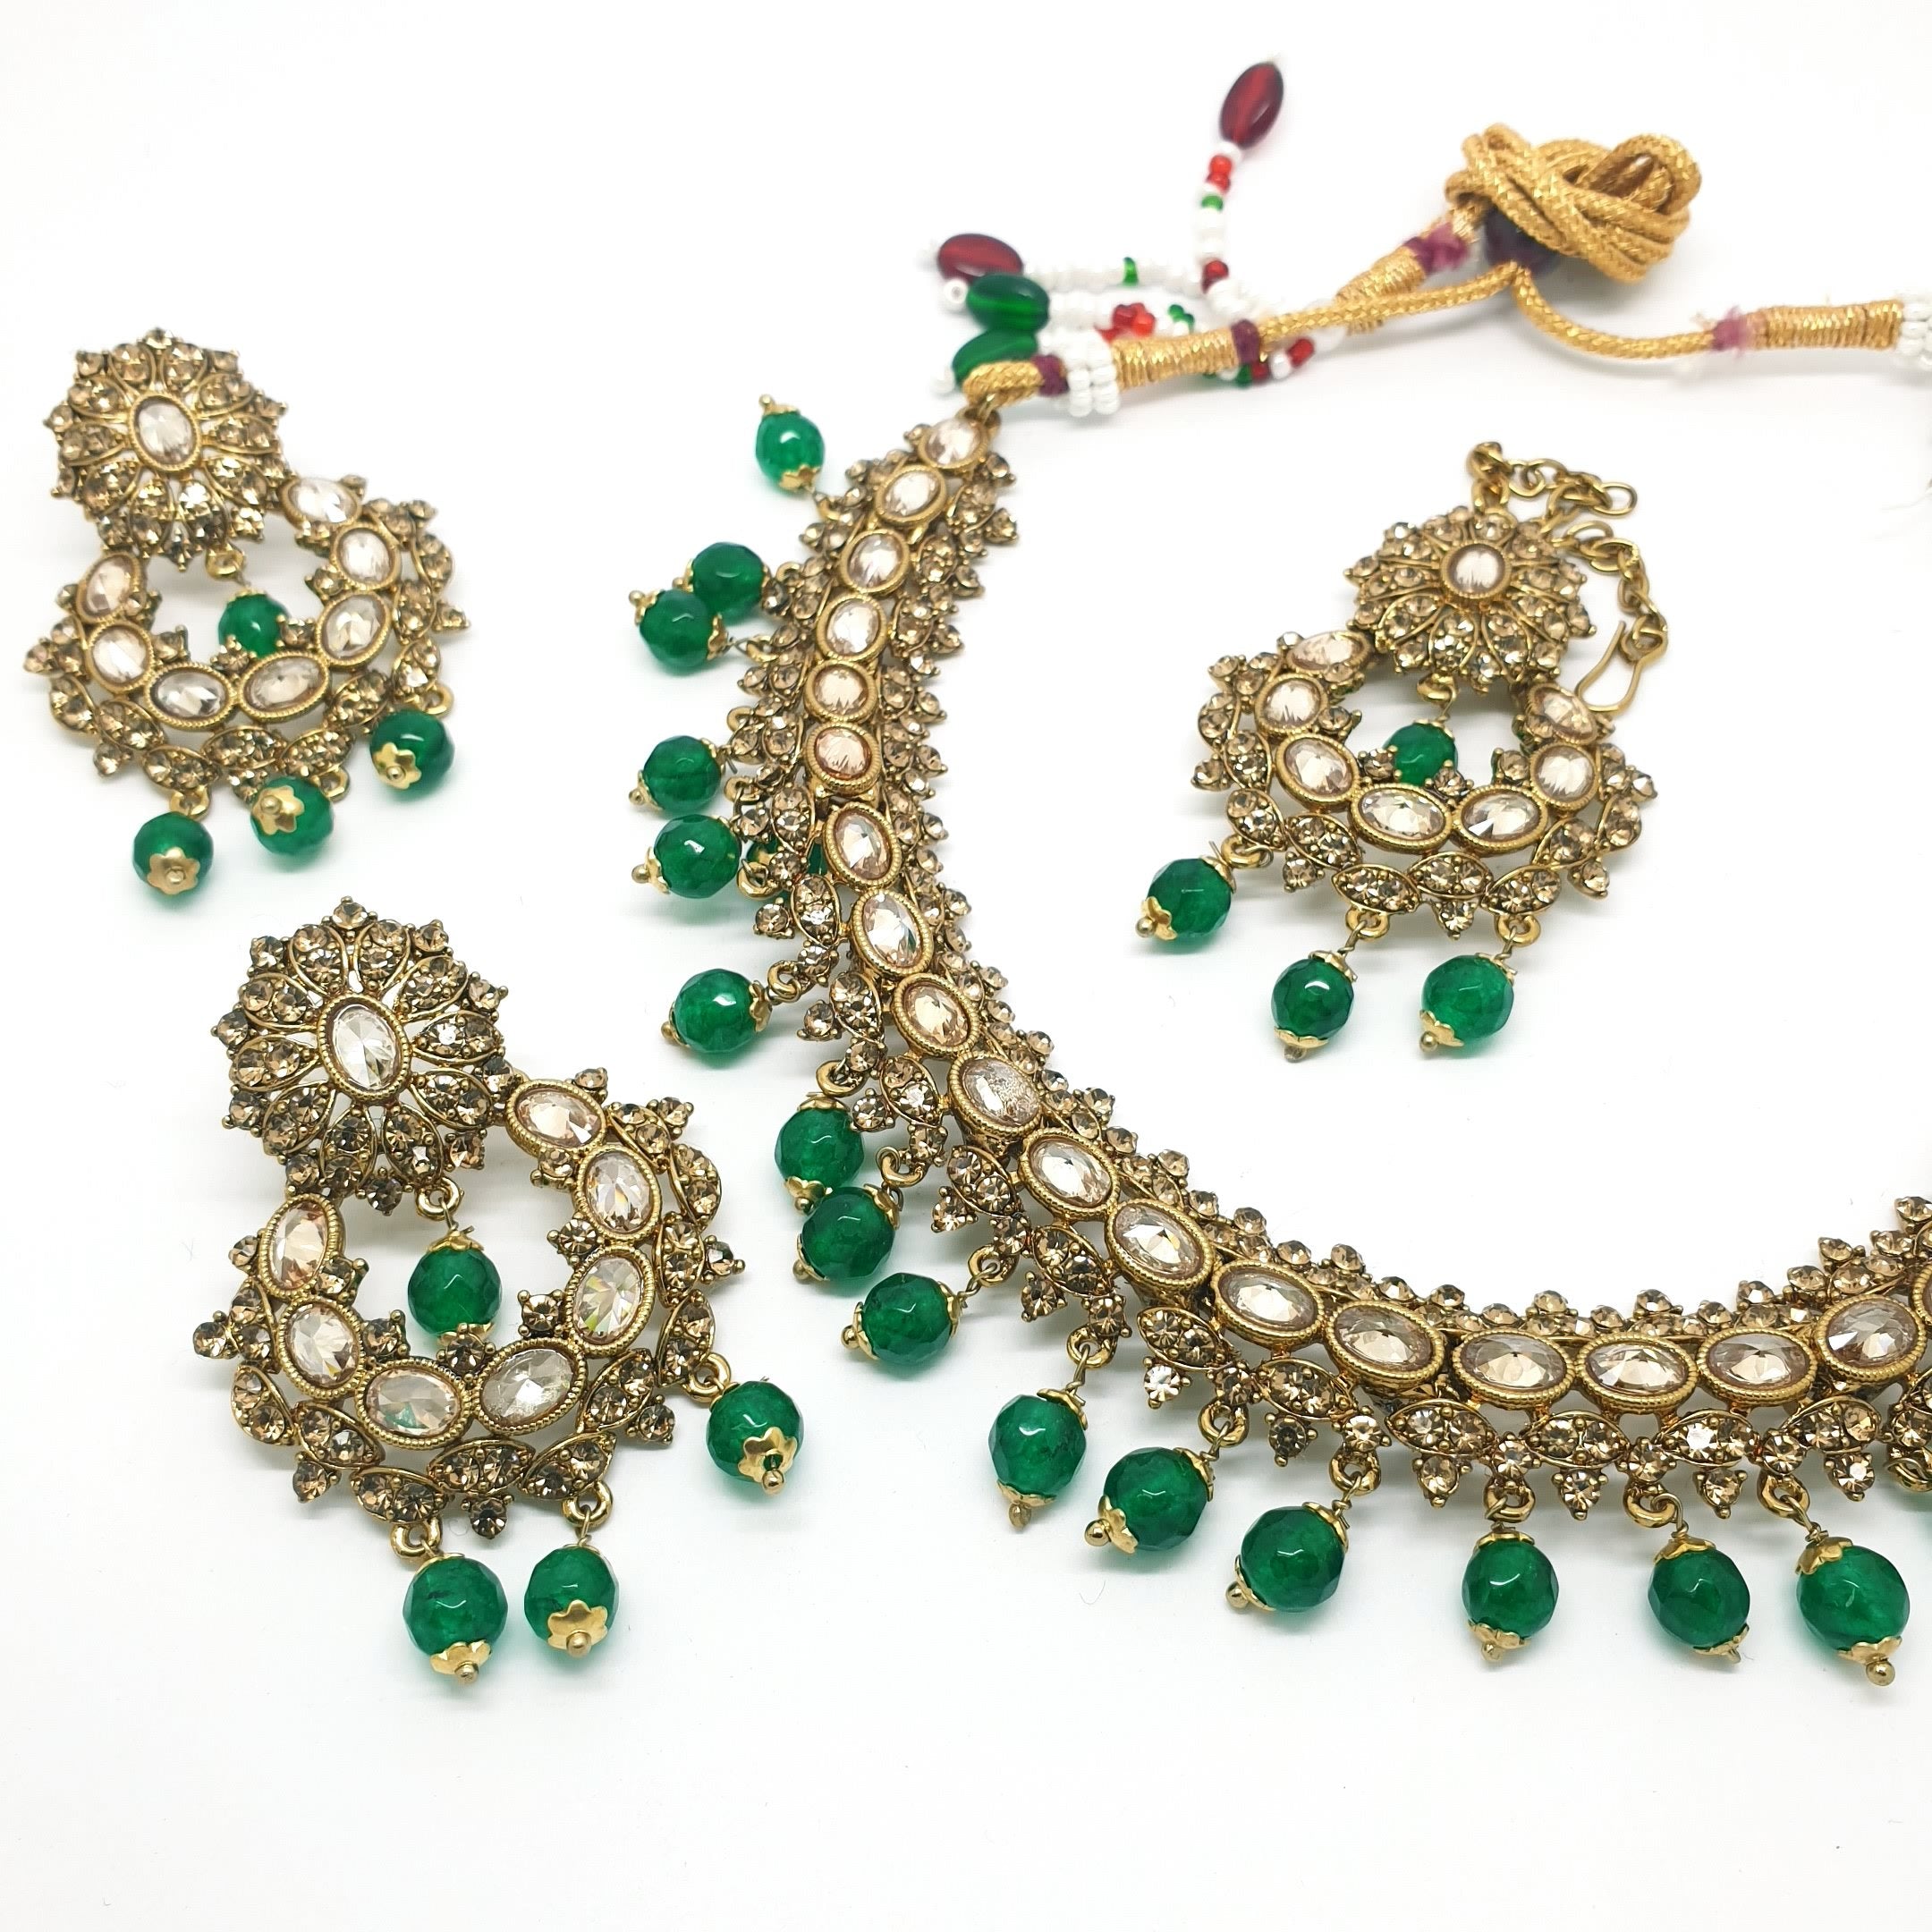 Reverse Stone Indian Fashion Jewellery set - with necklace, earrings and Tika MY8826 KP0719 - Prachy Creations